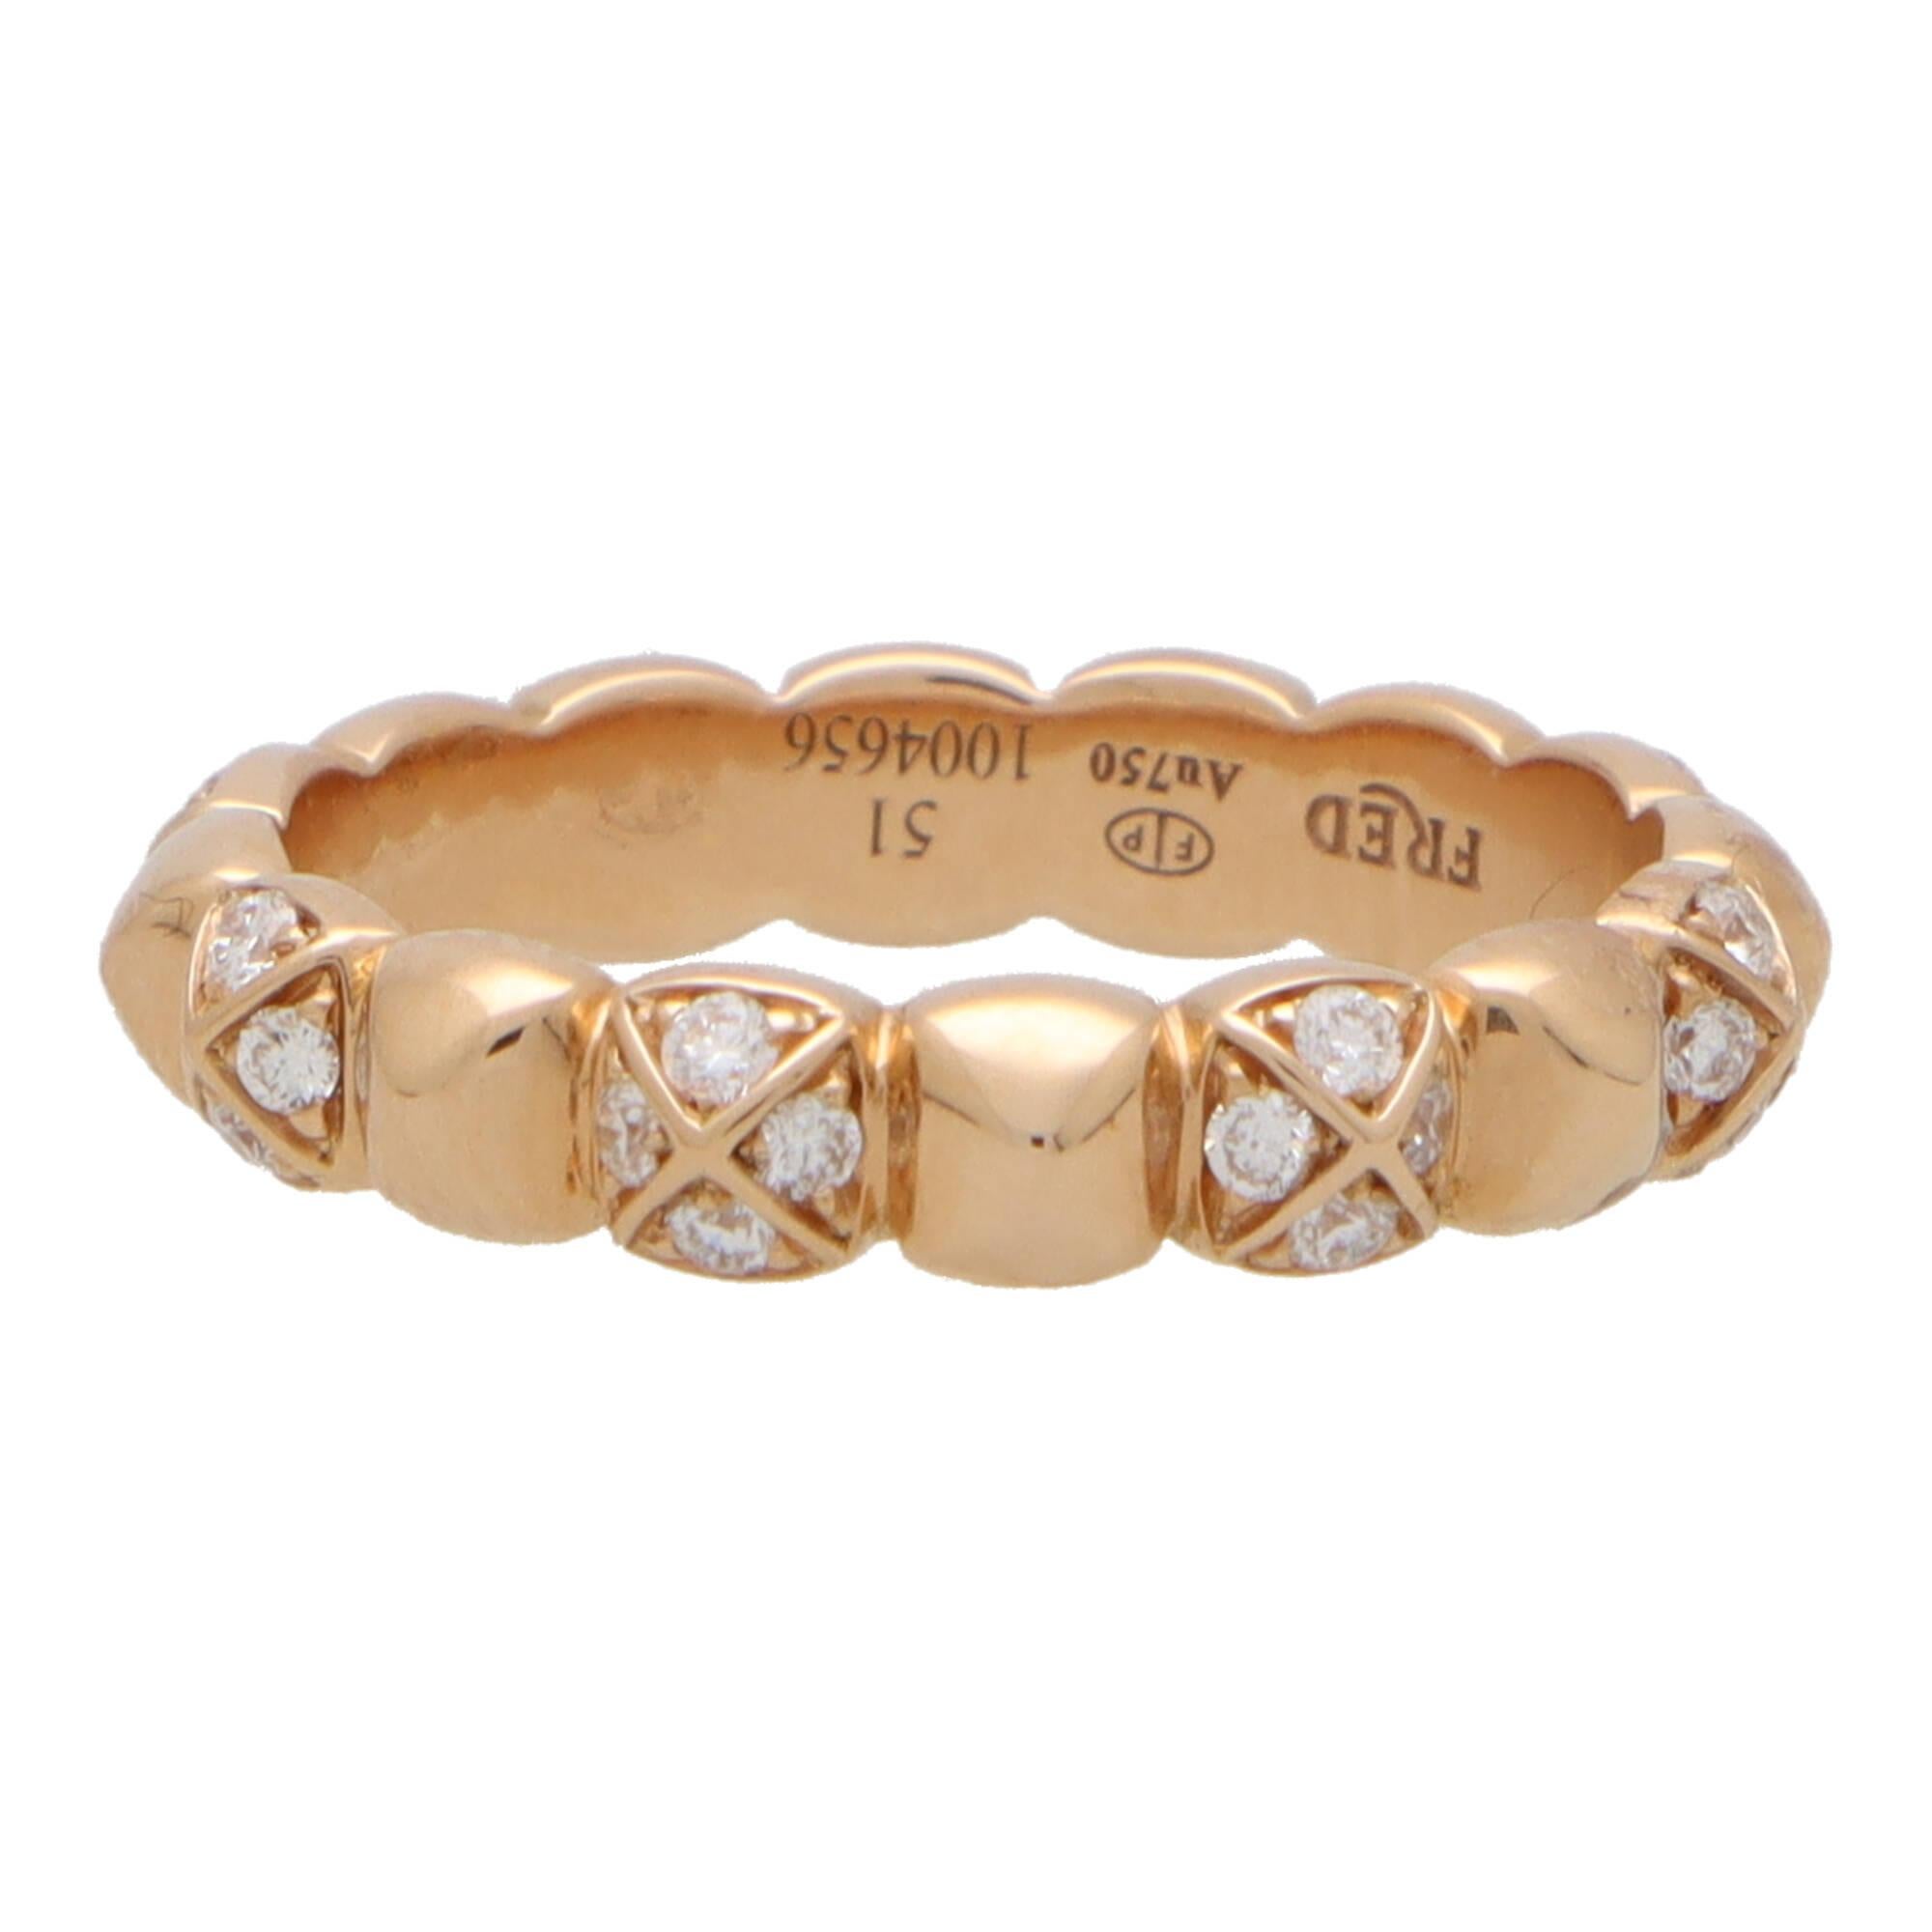  An interesting vintage Fred Paris diamond band ring set in 18k rose gold. 

The unique ring design is composed of bubble like motifs. The motifs alternate between being polish rose gold, and being pave set with four diamonds. The sparkle of the